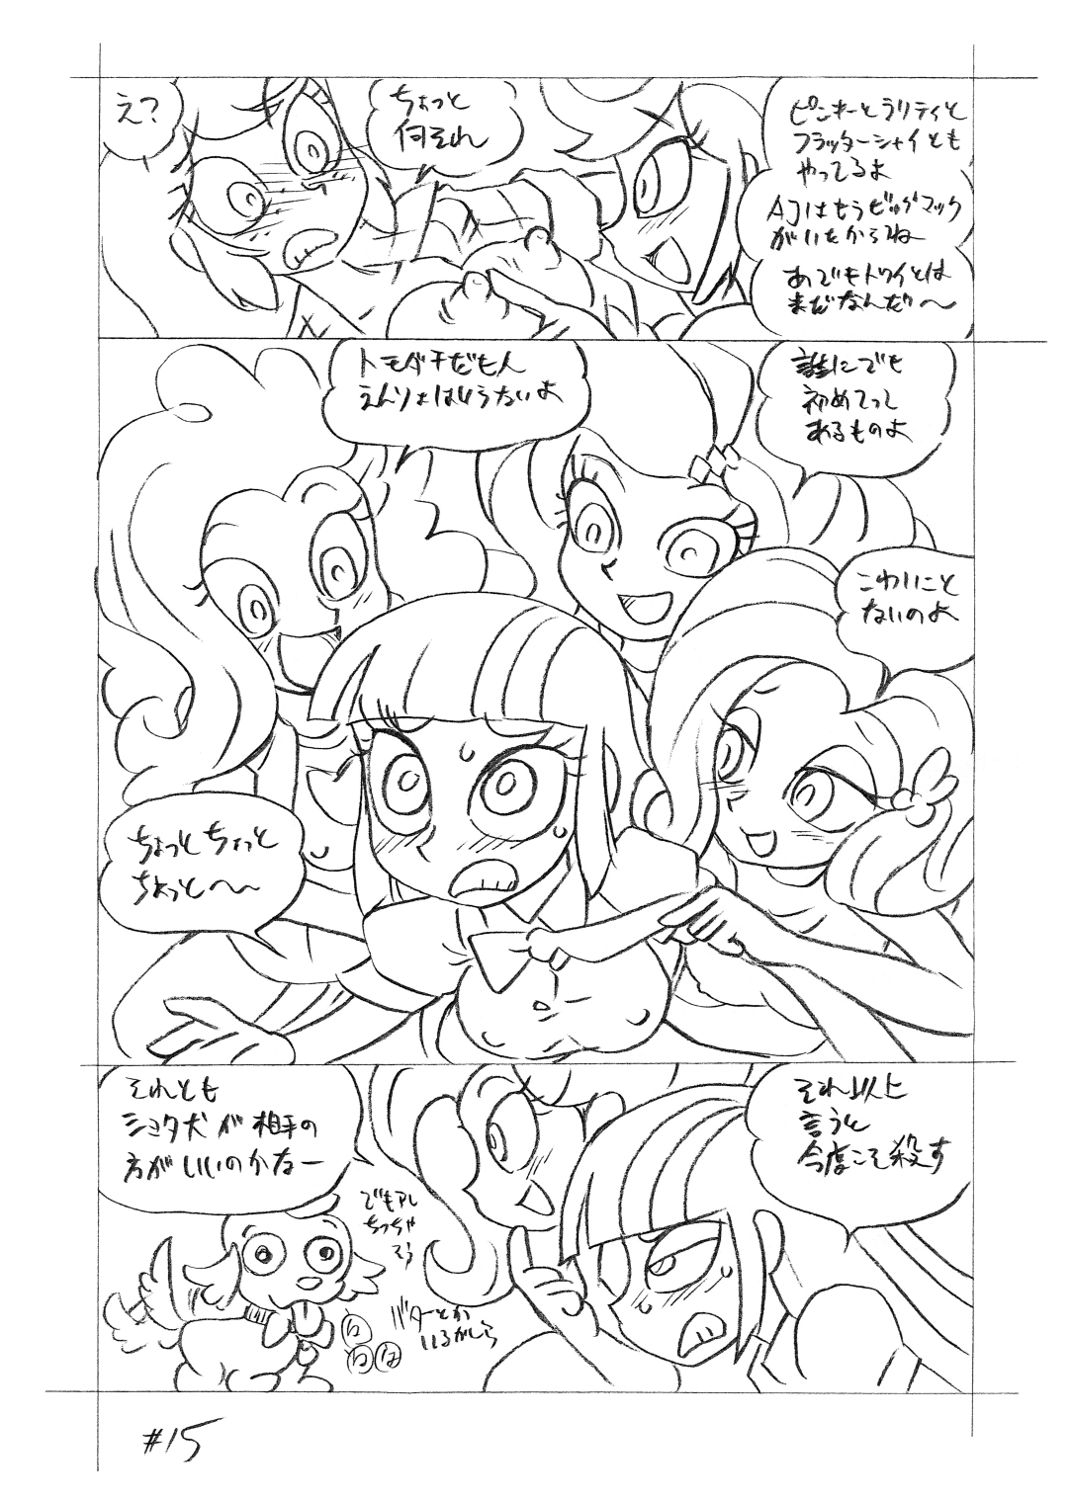 [Union of the Snake (Shinda Mane)] Psychosomatic Counterfeit EX- A.J. in E.G. Style (Ver. 02) (My Little Pony: Friendship Is Magic) 13